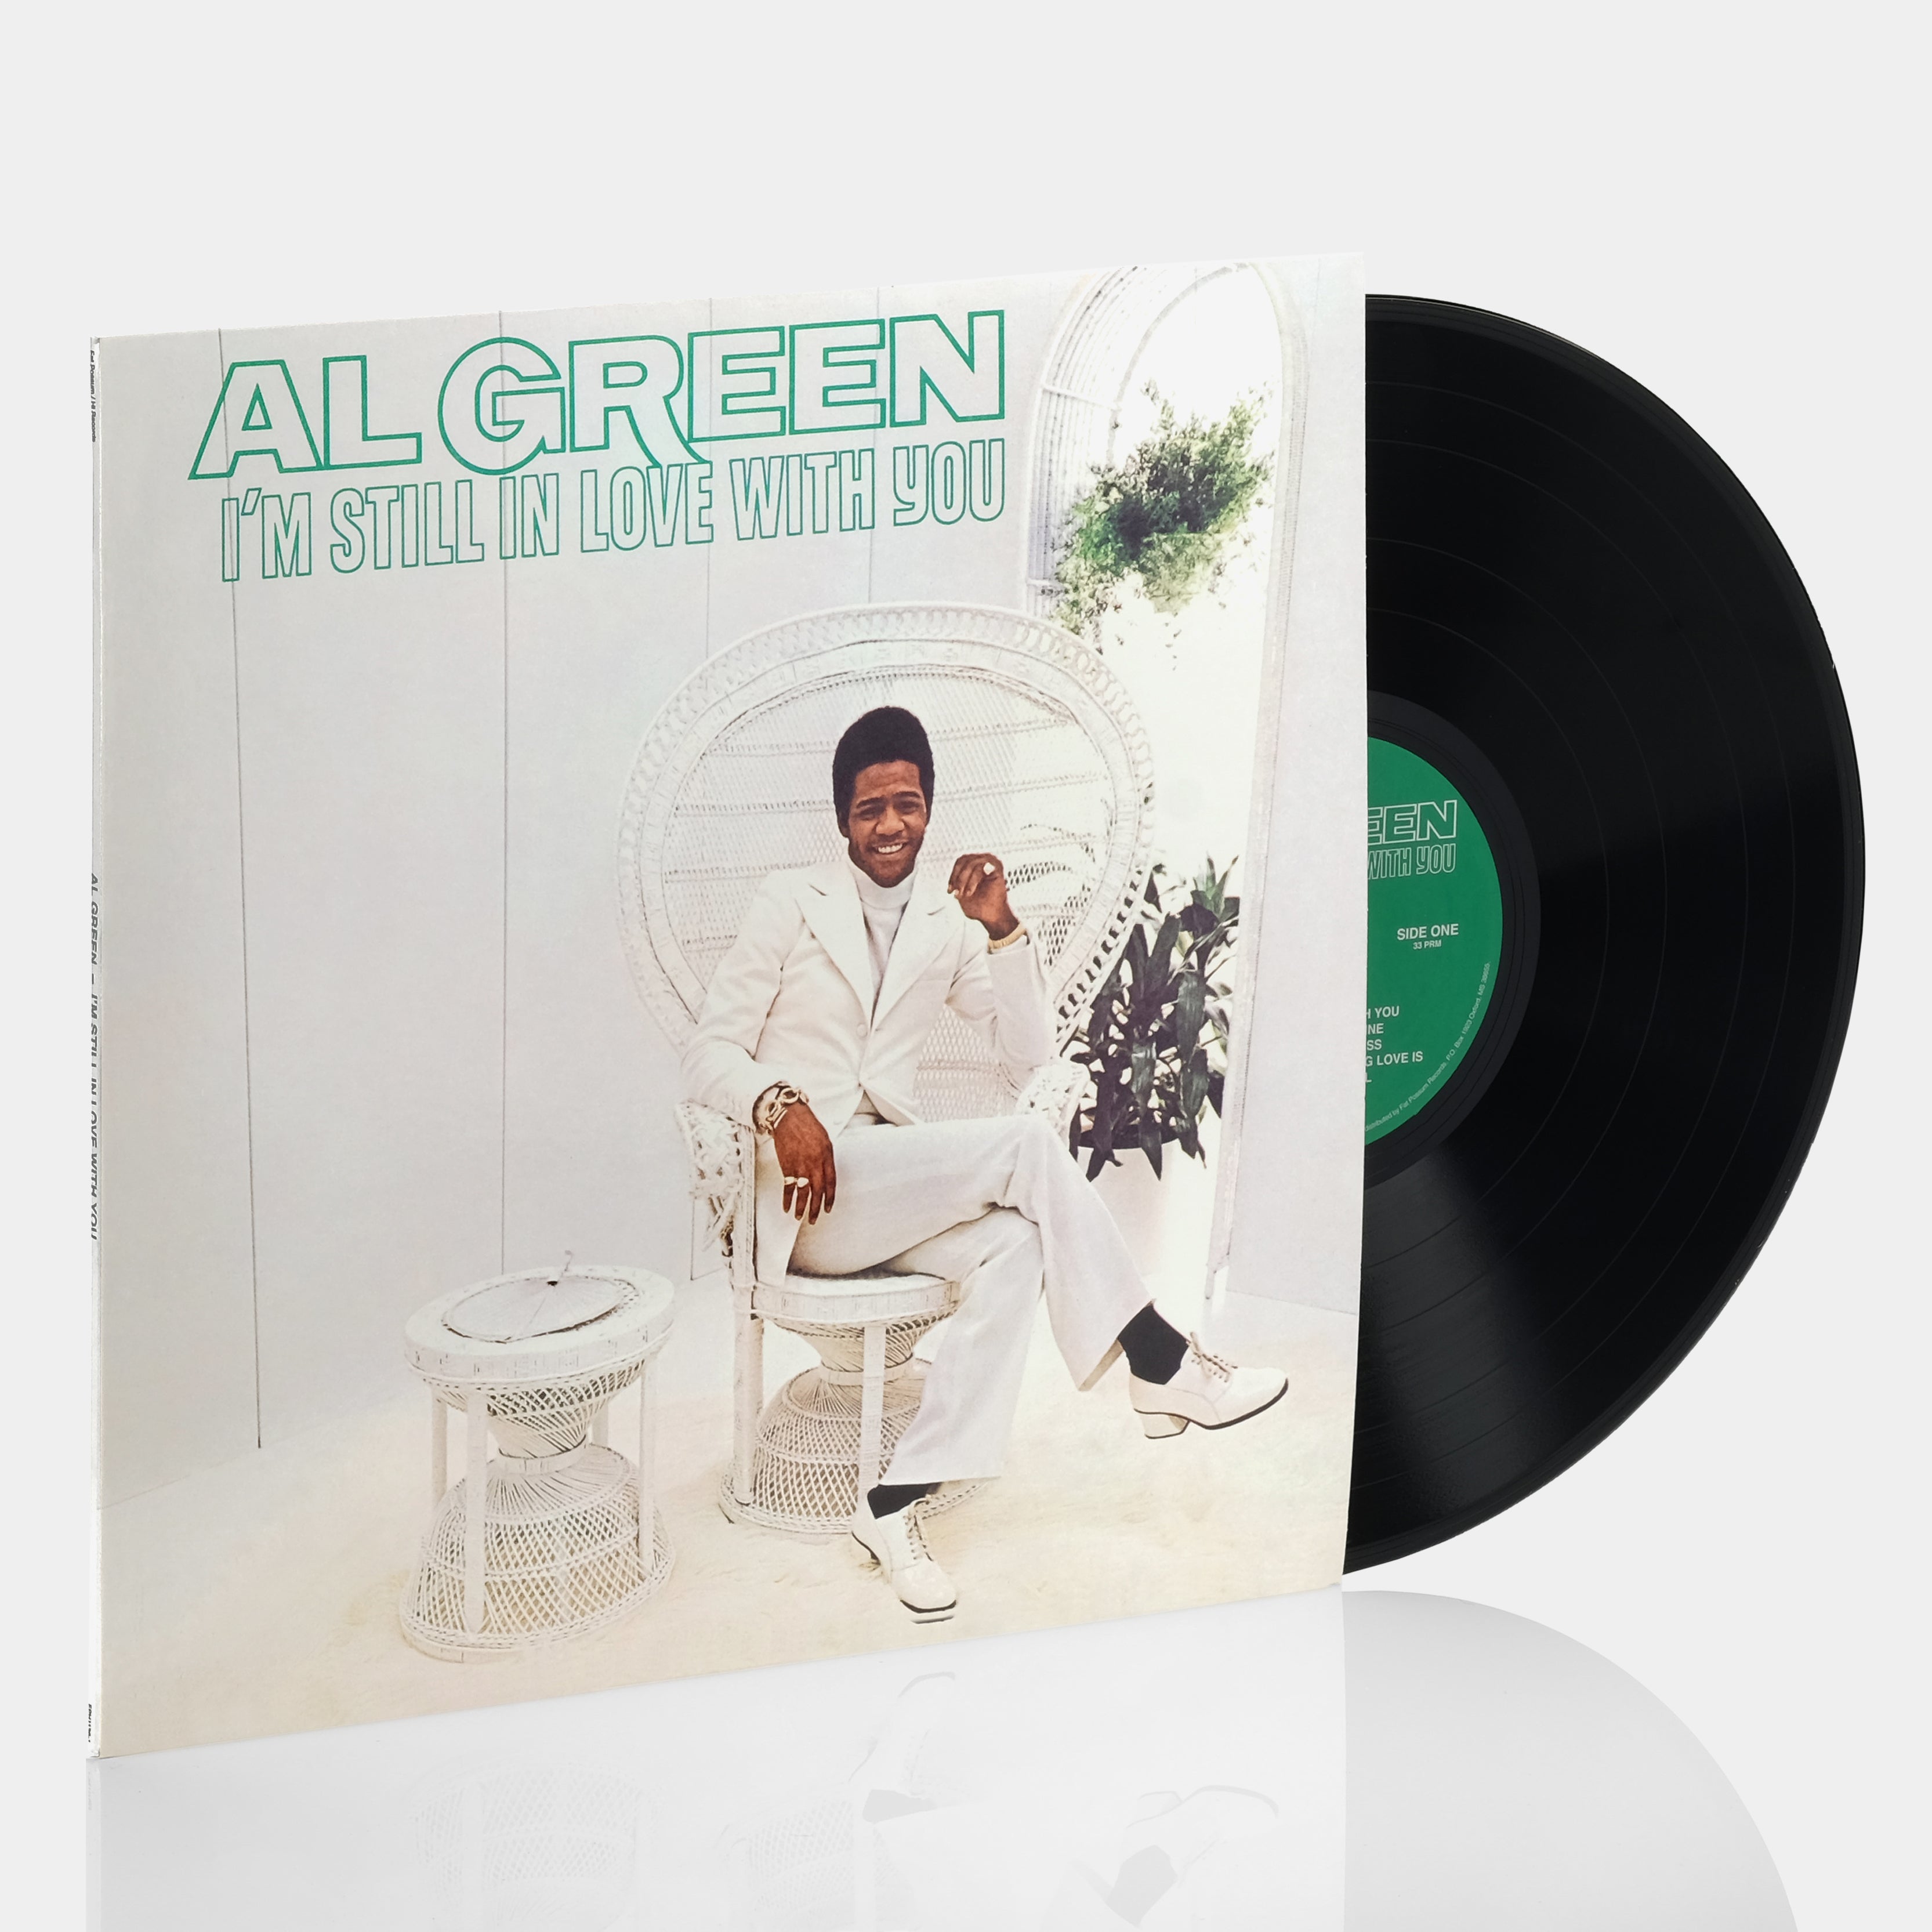 Green - I'm Still Love With You LP